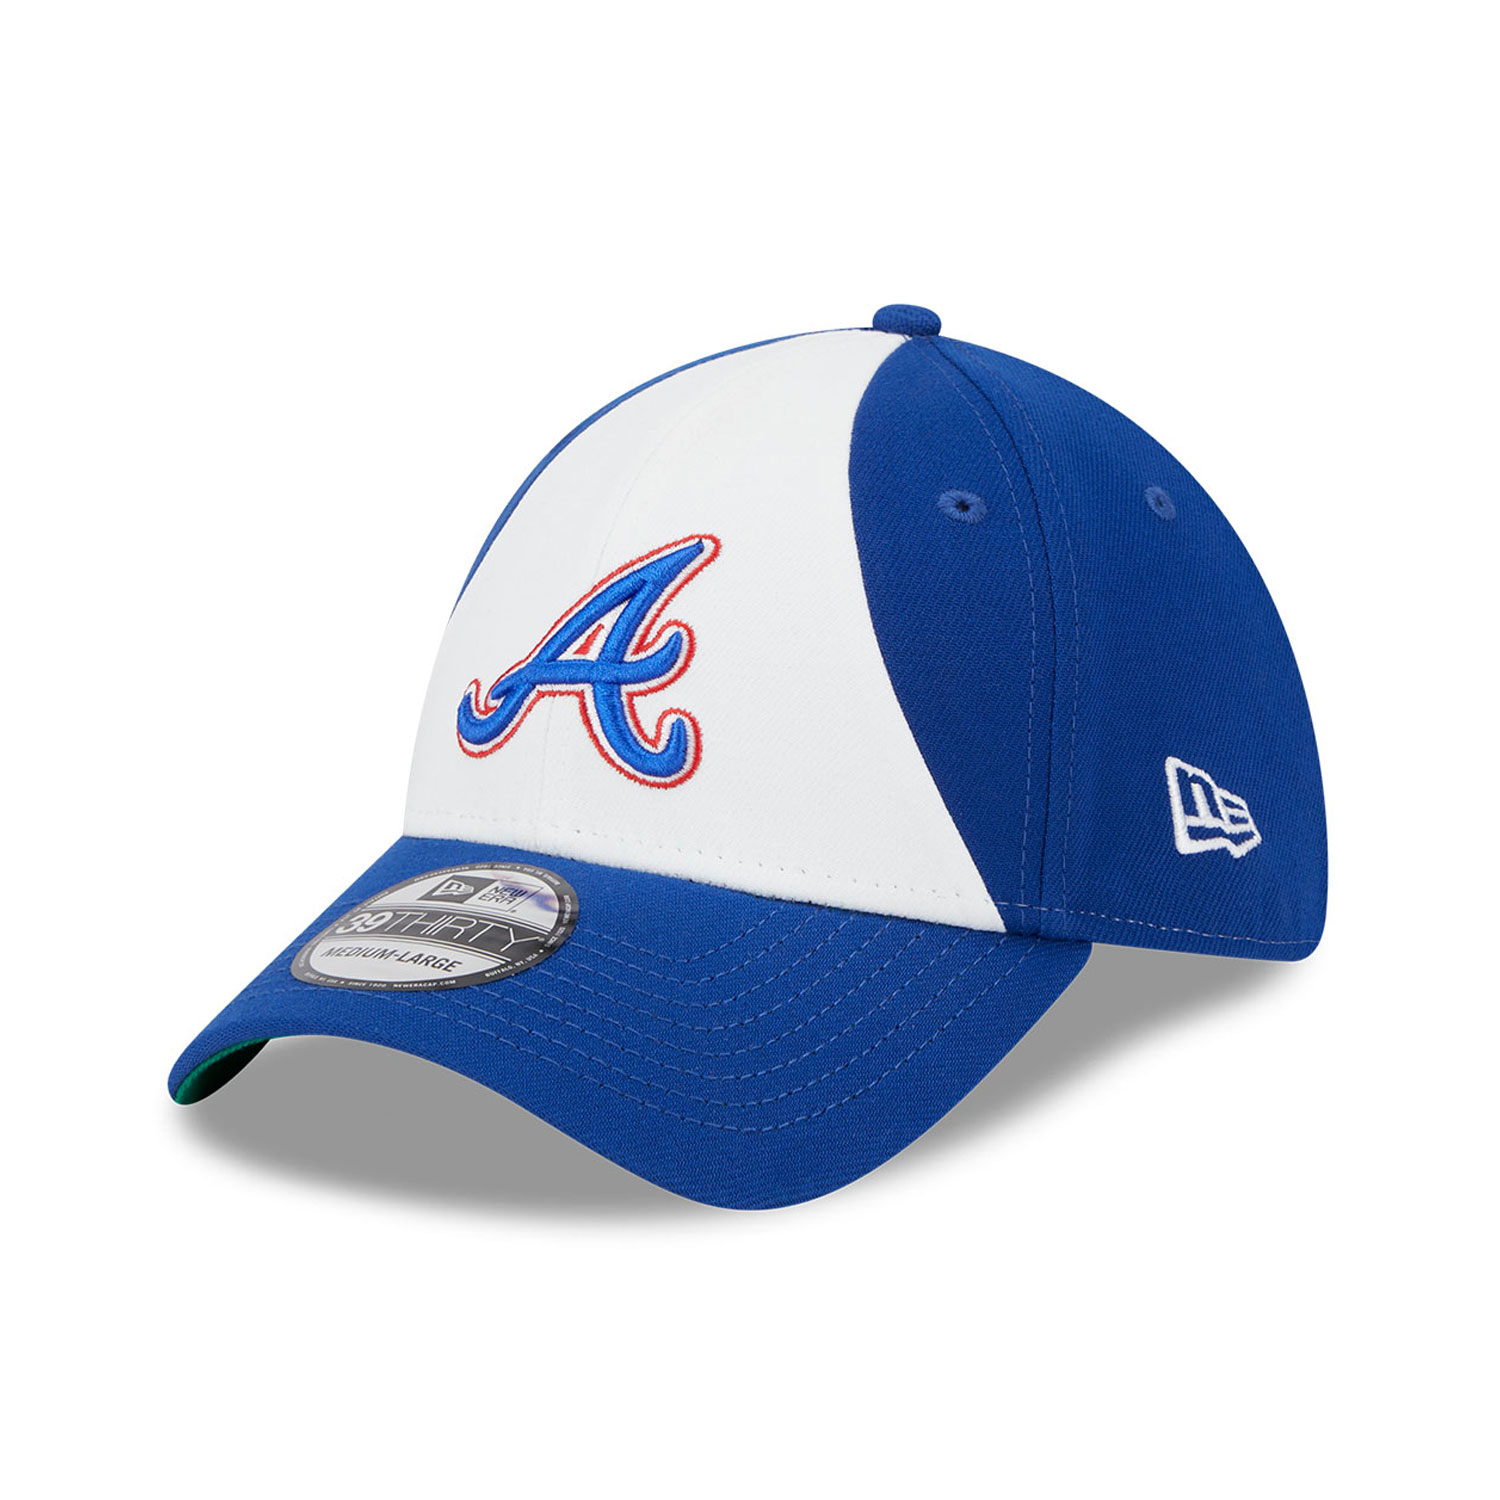 Atlanta Braves - City Connect jerseys, caps, & more are NOW